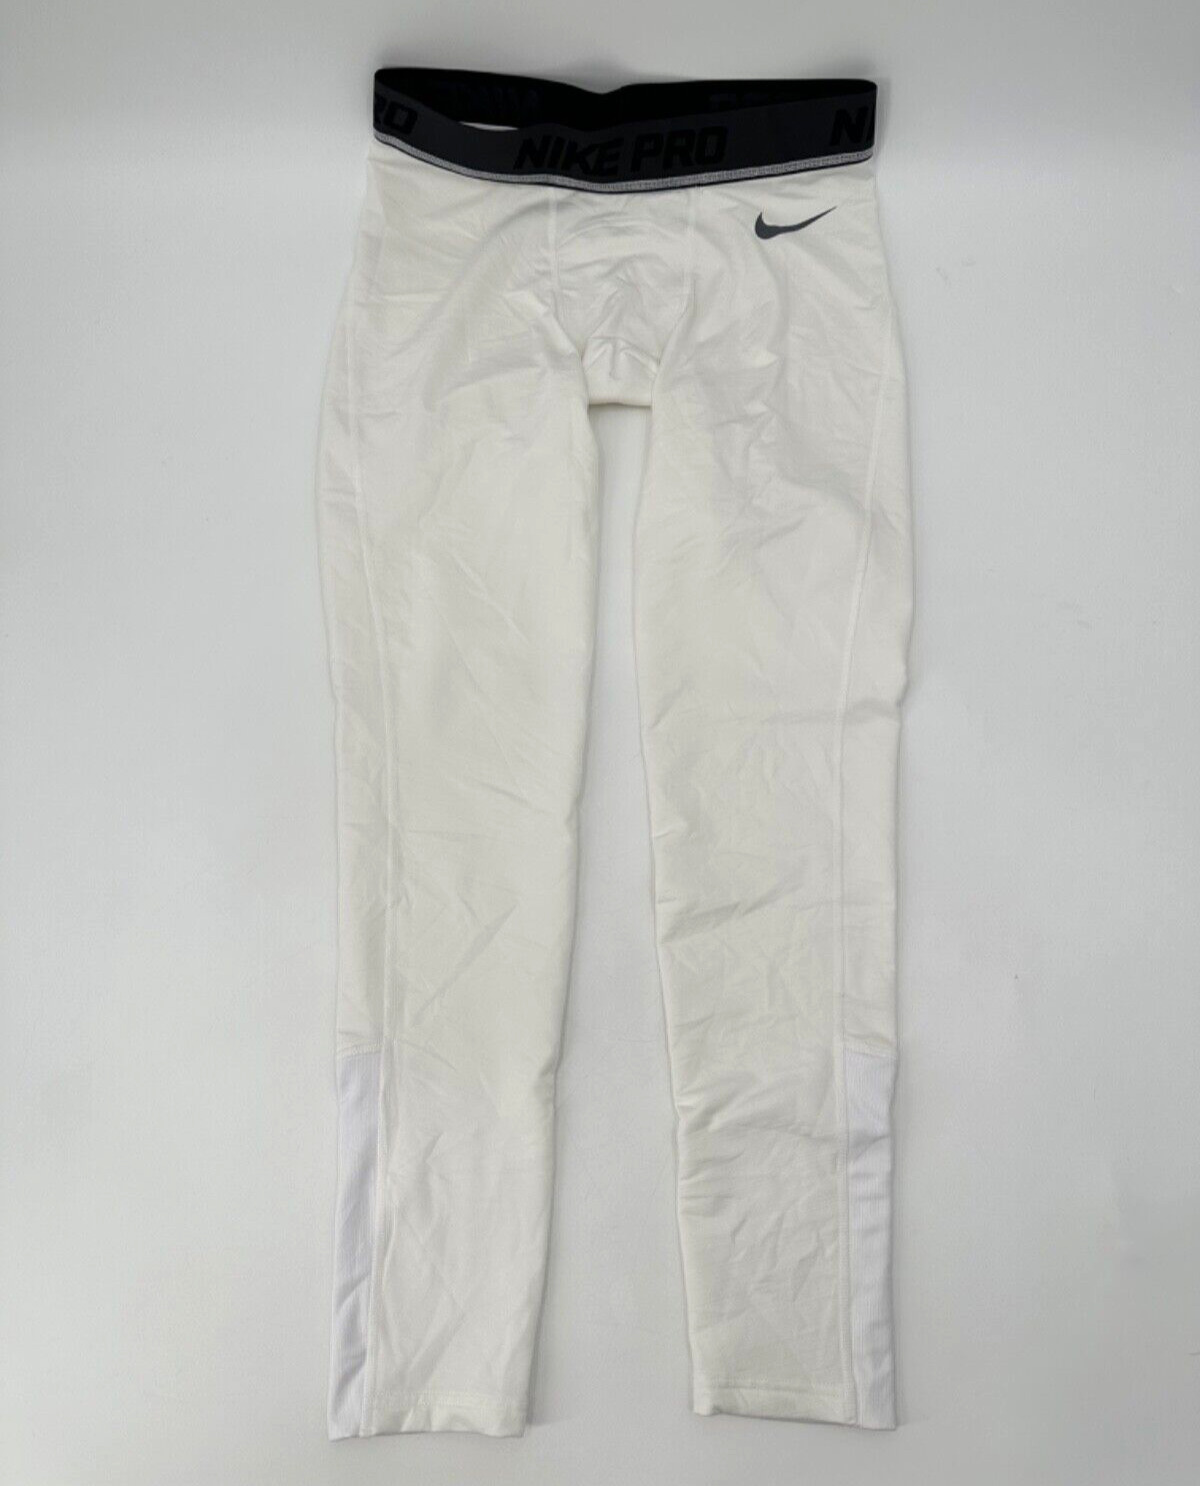 GERALD ALEXANDER MIAMI DOLPHINS GAME USED WHITE NIKE PRO COMPRESSION PANTS XL